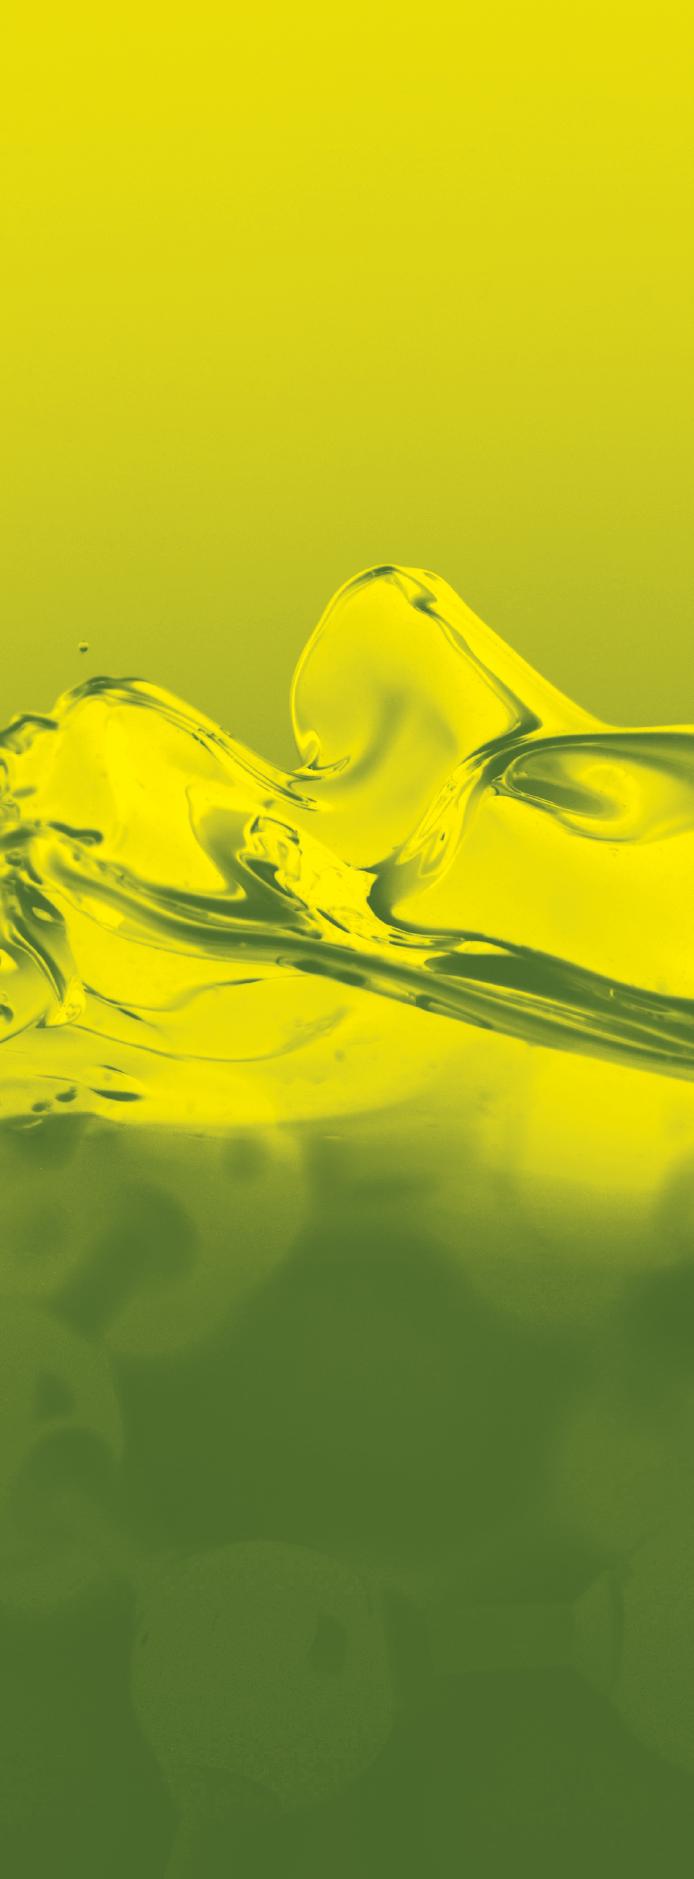 With global industry moving toward environmentally friendly green lubricants, some very challenging issues have been created for lubrication in gearing applications.